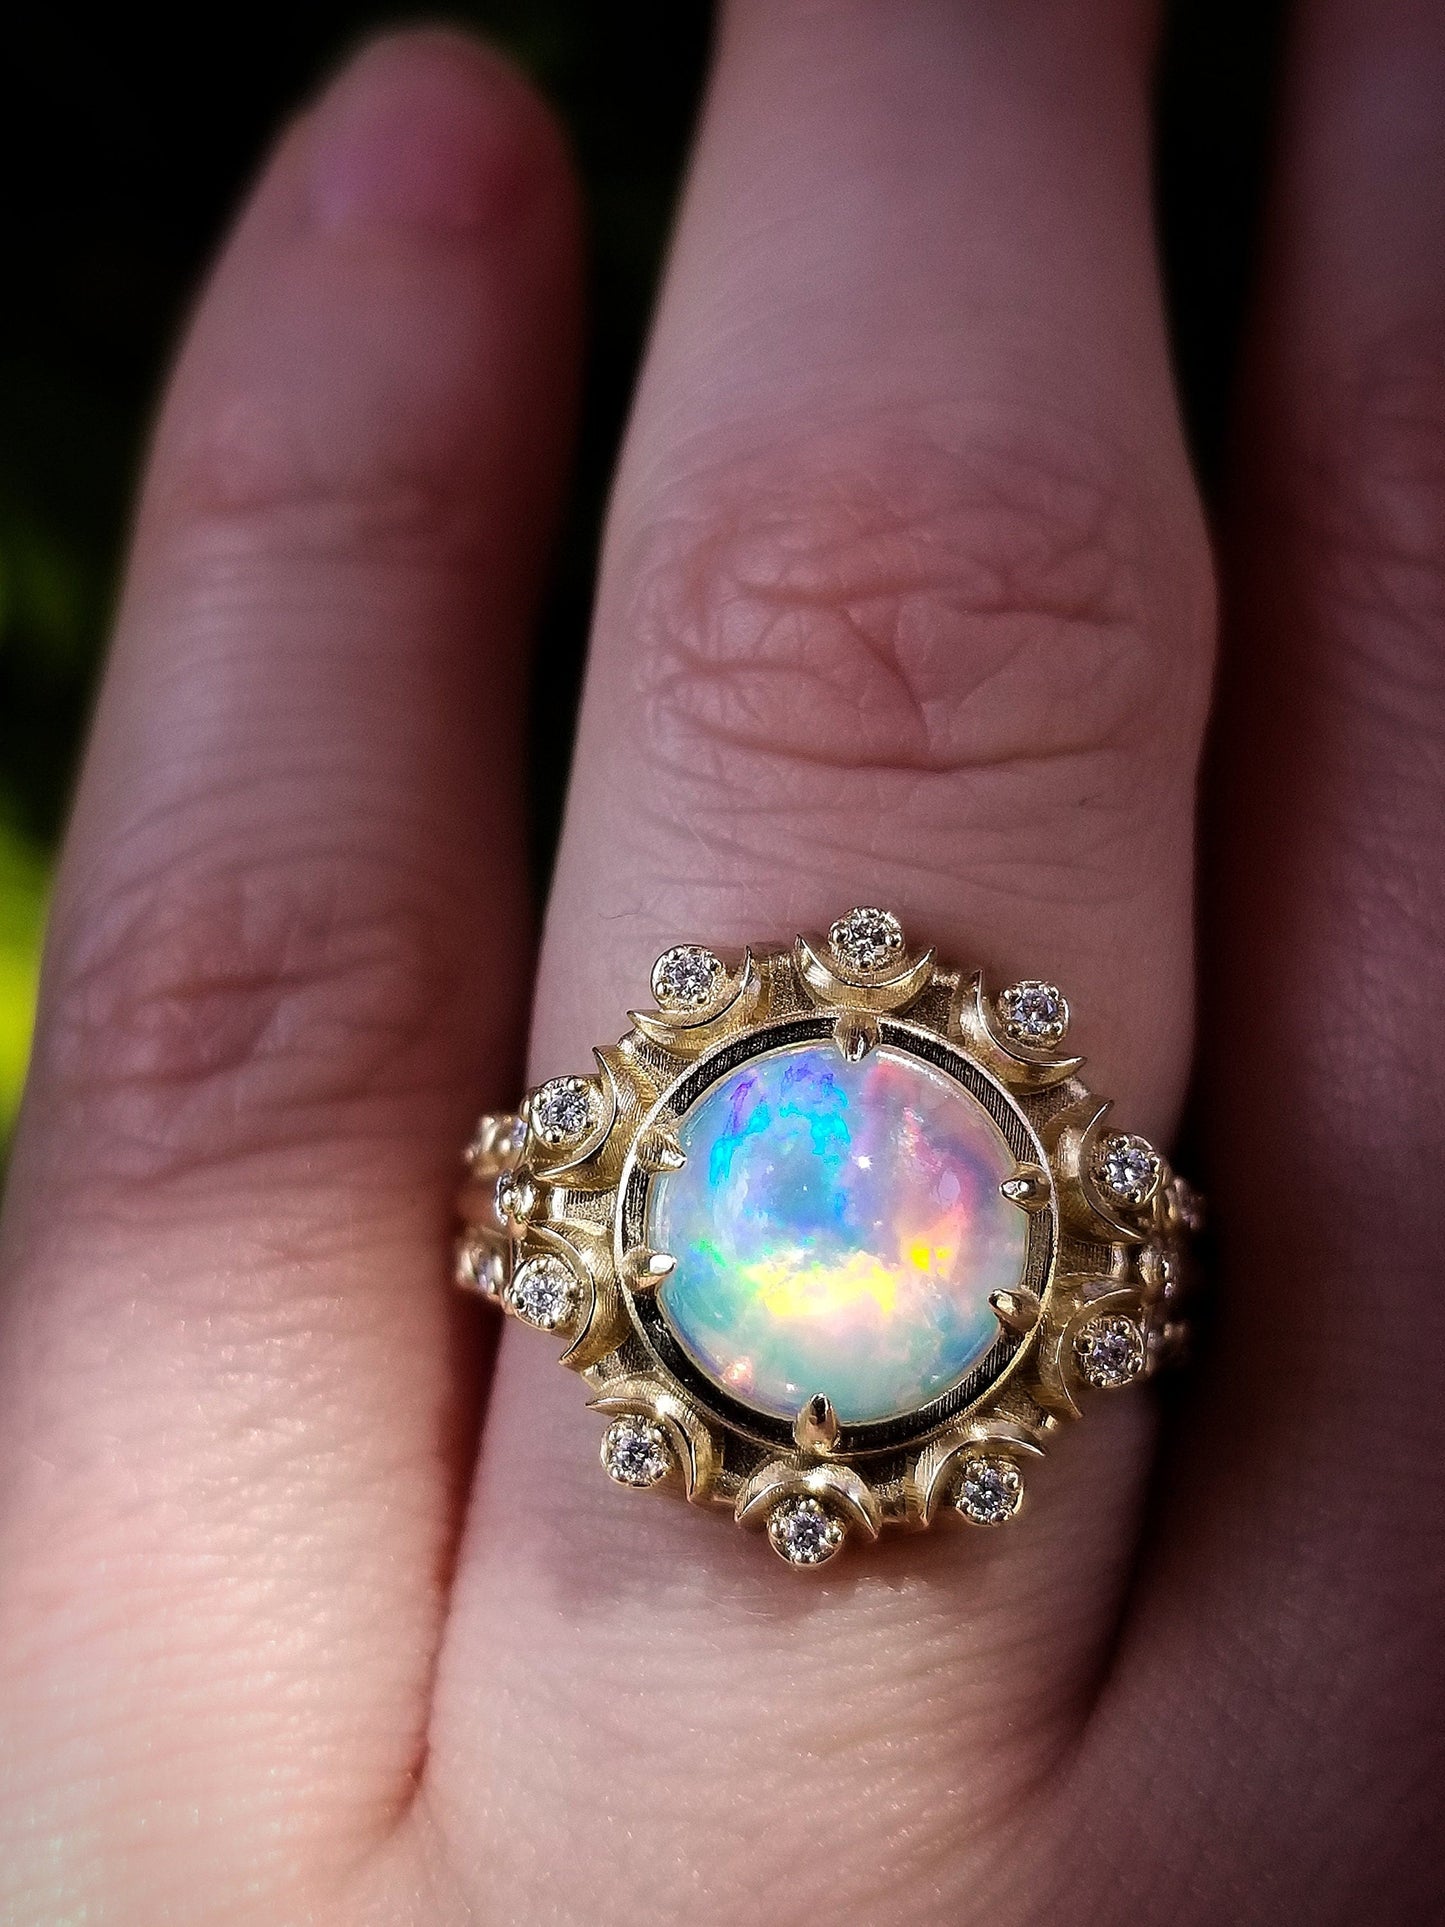 Opal Crystal Ball Ring - Victorian Inspired Giant Opal Ring with Diamonds, Leaves and Tiny Crescent Moons - 14k Yellow Gold Engagement Ring